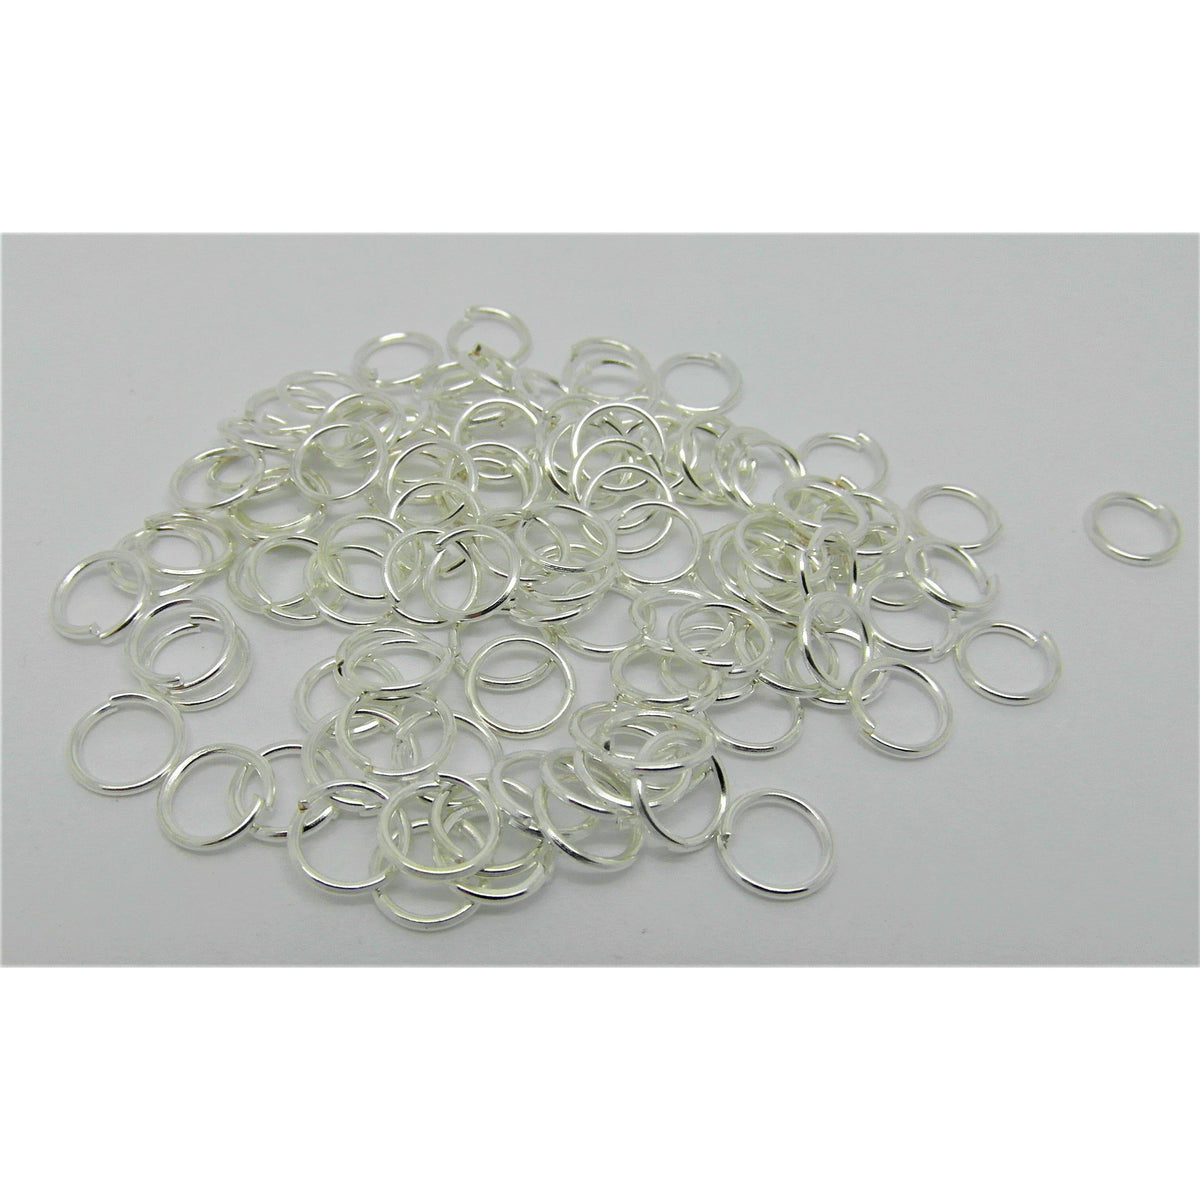 100, 16mm Jump Rings, Silver Platinum Jump Rings, Closed but Unsoldered,  Iron Jump Rings, Jewelry Findings Crafting, Jewelry Making, 20P 